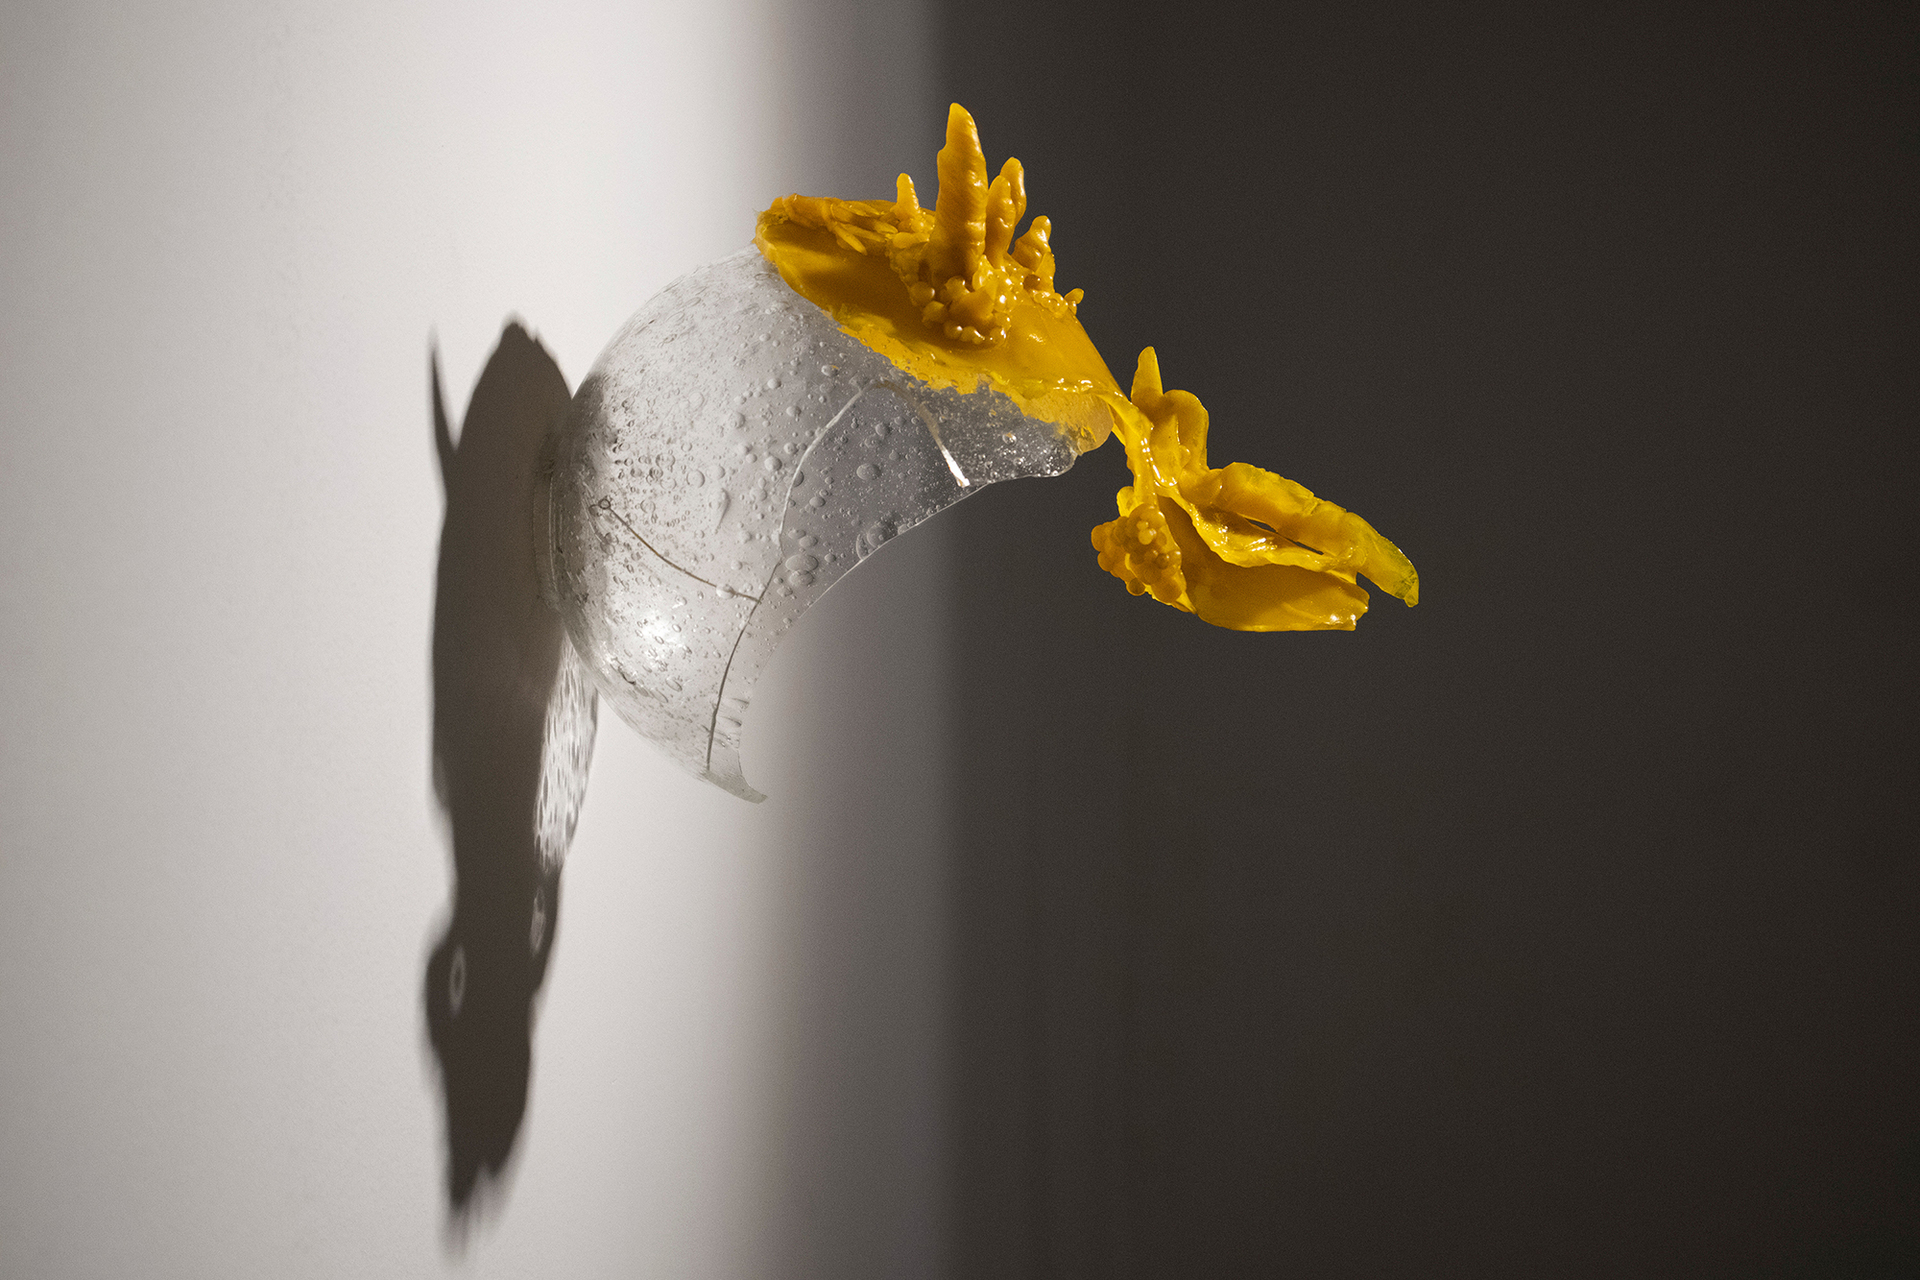 Gideon Horváth, The faun's mask, 2021, beeswax, glass, side view, photo by Gideon Horváth